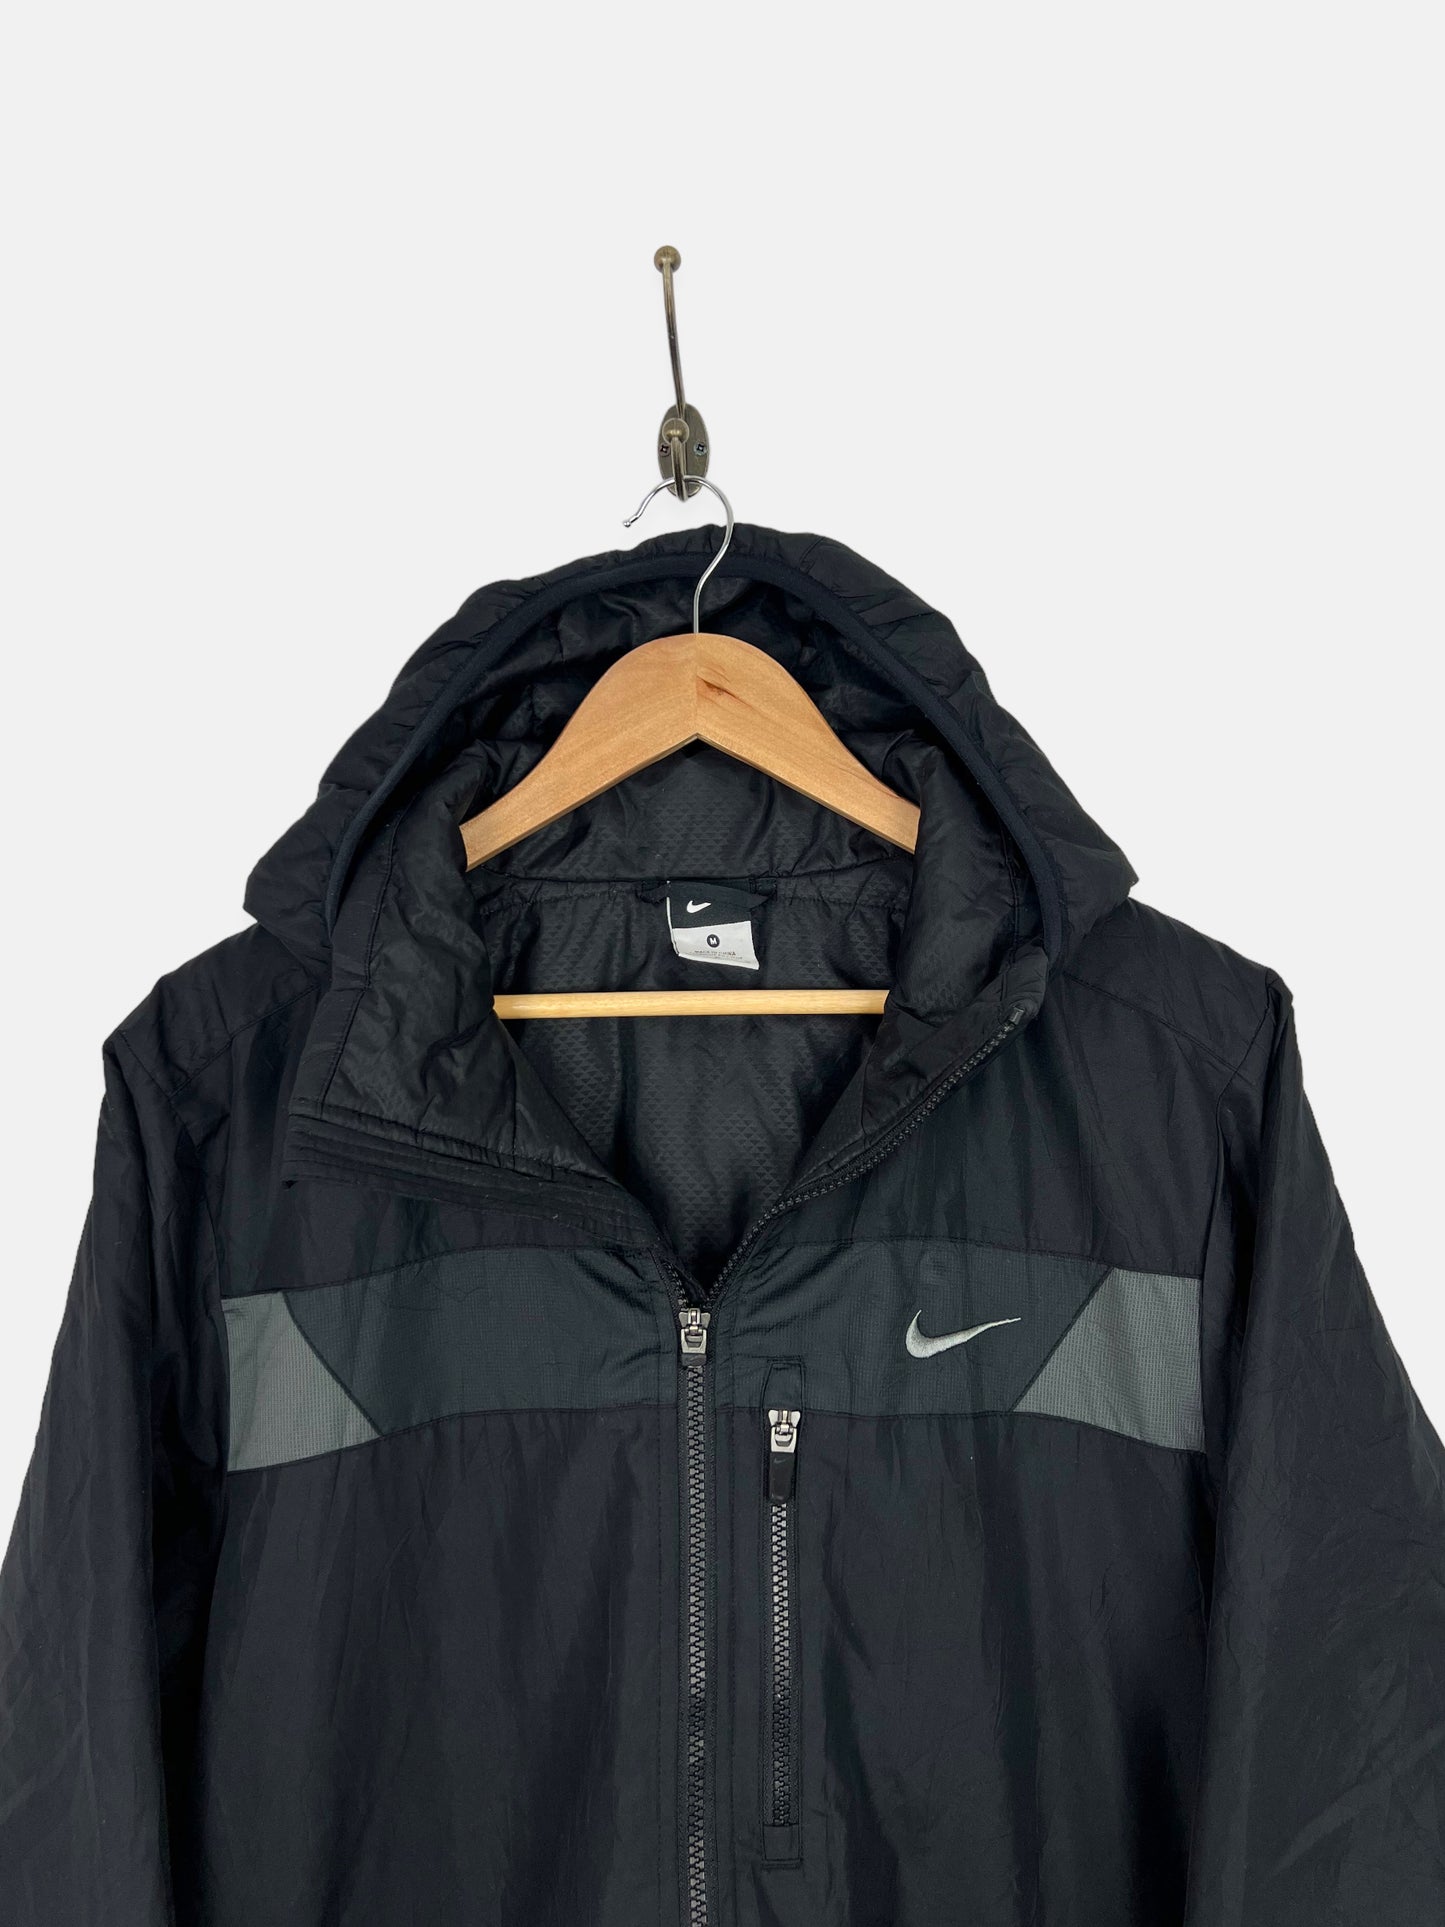 Nike Embroidered Jacket with Hood Size M